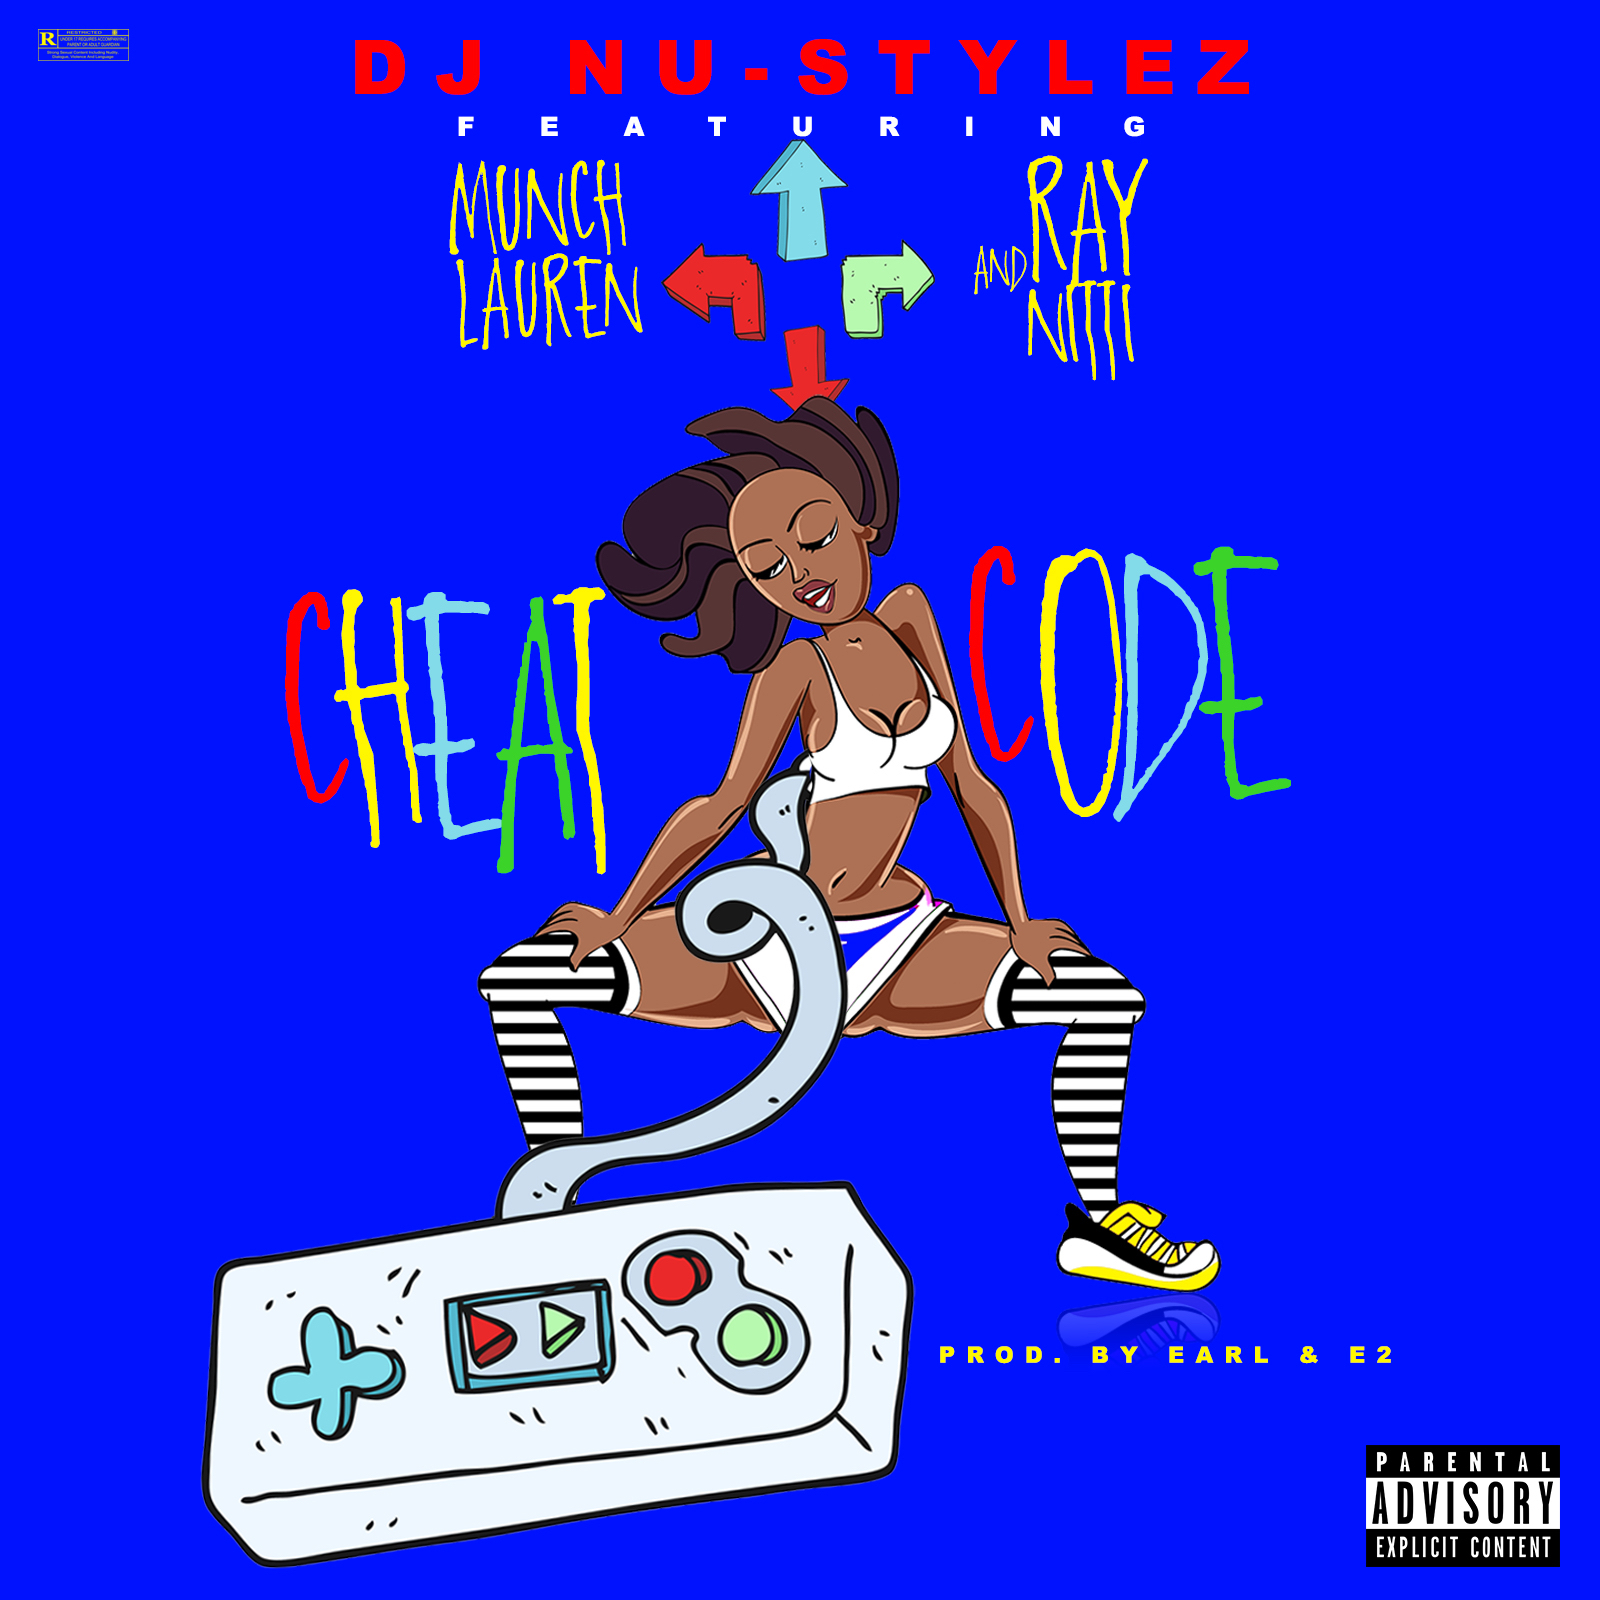 Art for Cheat Code (Clean Intro/Outro) by DJ Nu-Stylez Feat. Munch Lauren x Ray Nitti